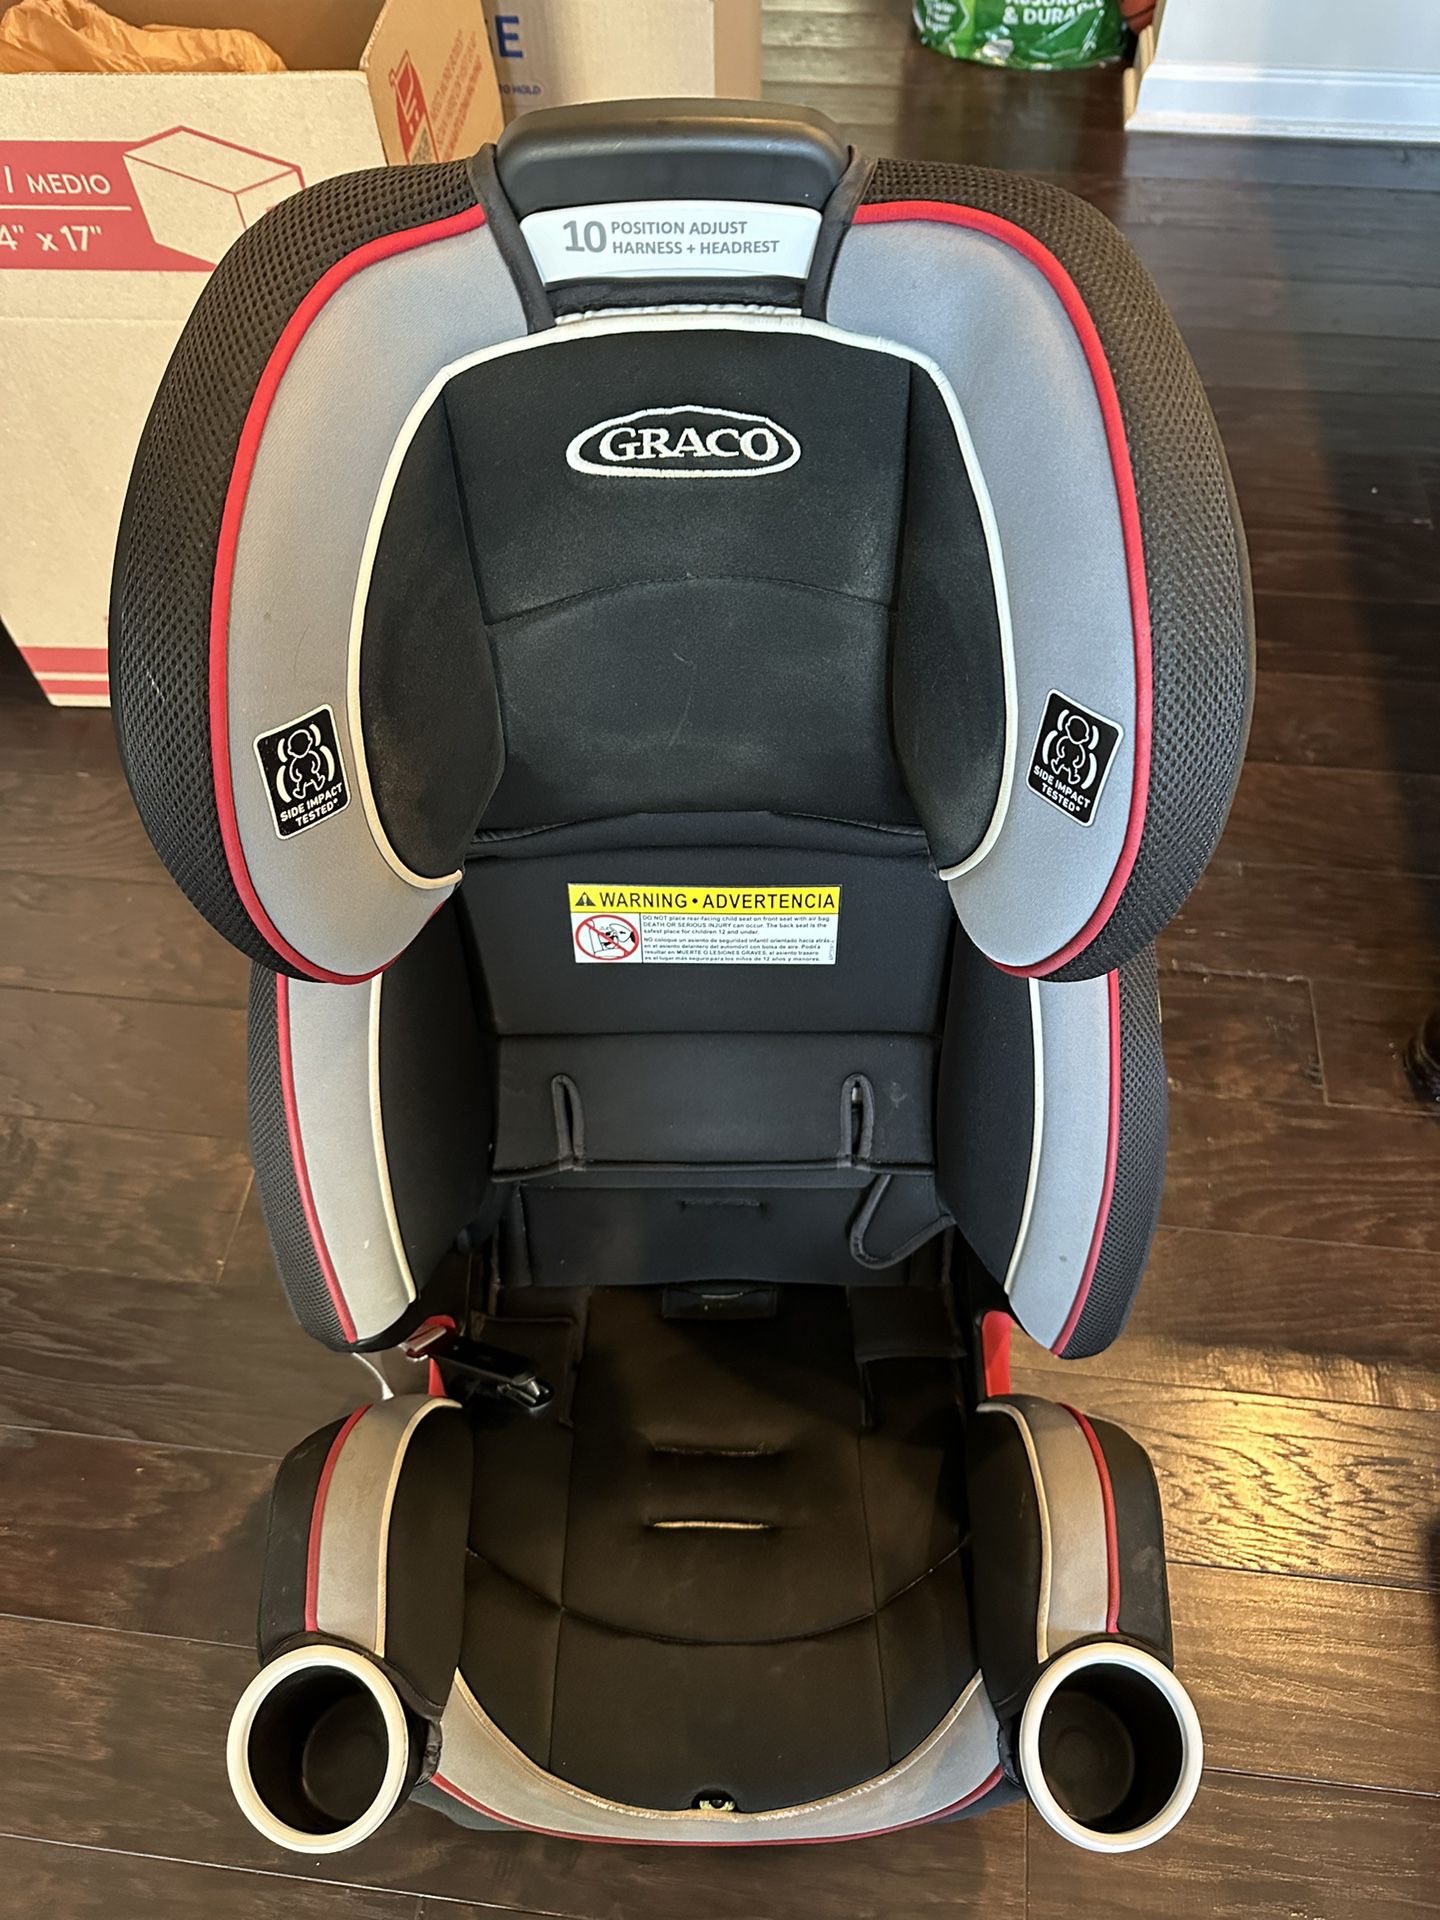 Graco 4ever Convertible Car Seat Needs Go Fast!!!